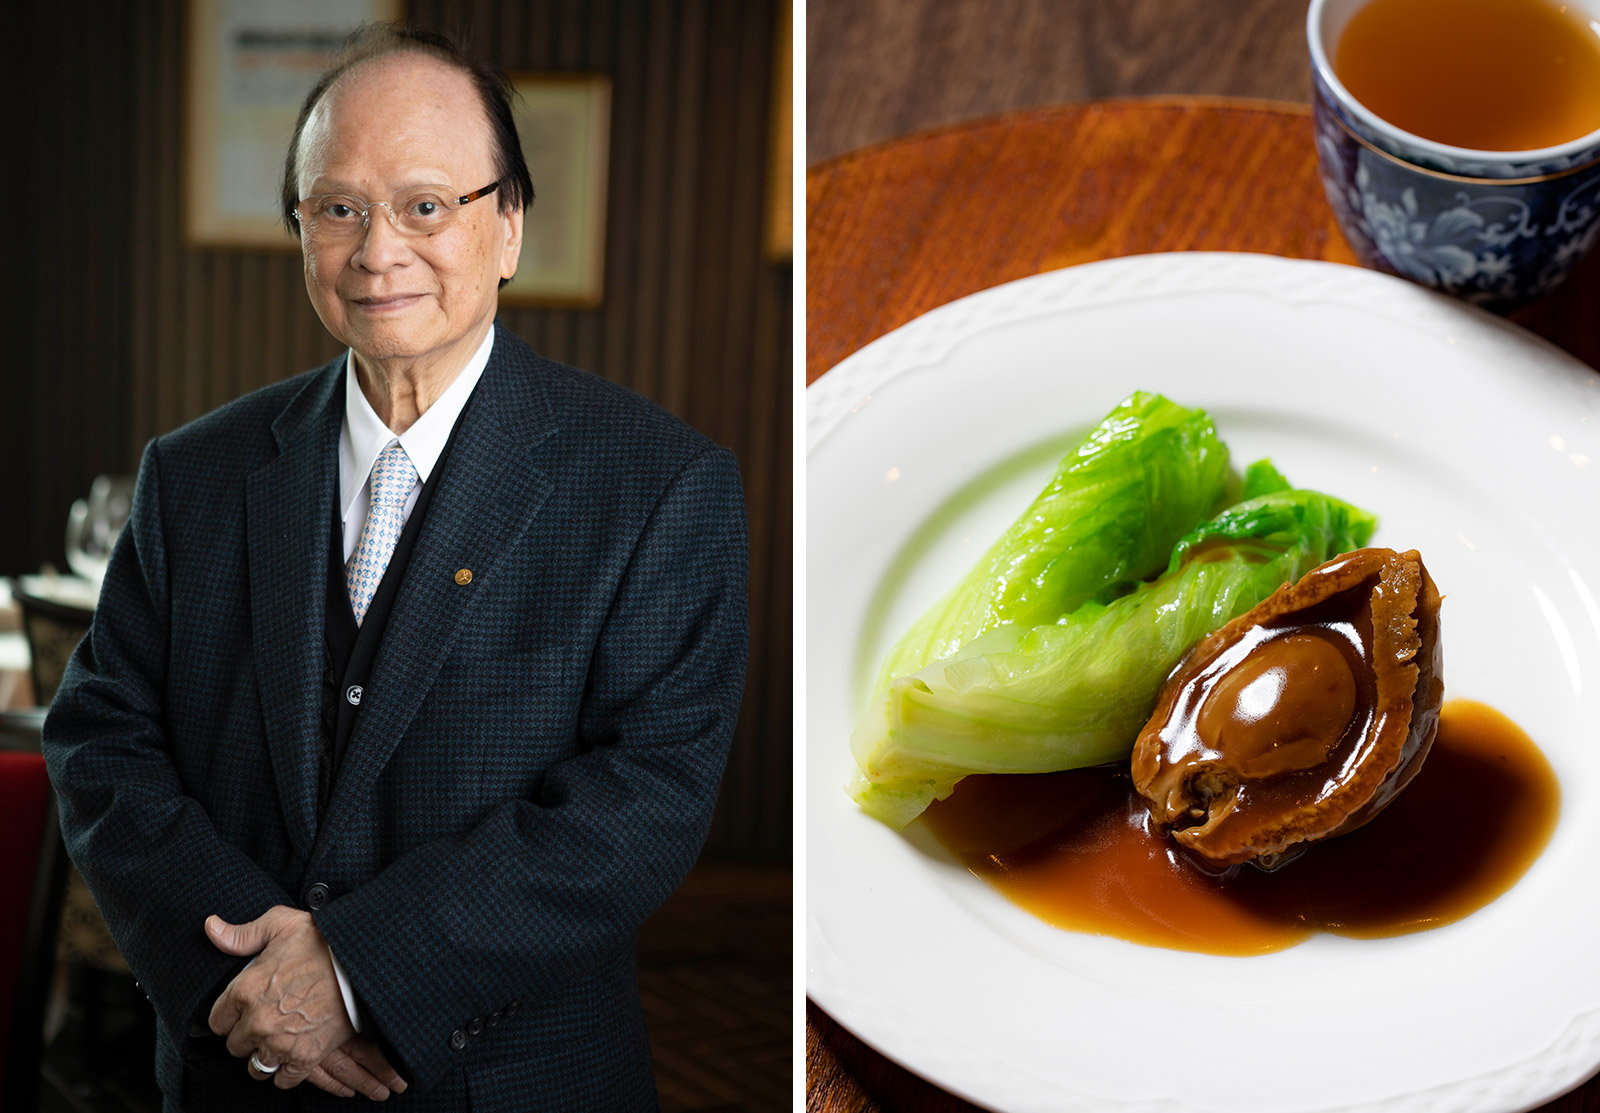 Three-Michelin-starred Forum and its owner Yeung Koon-yat